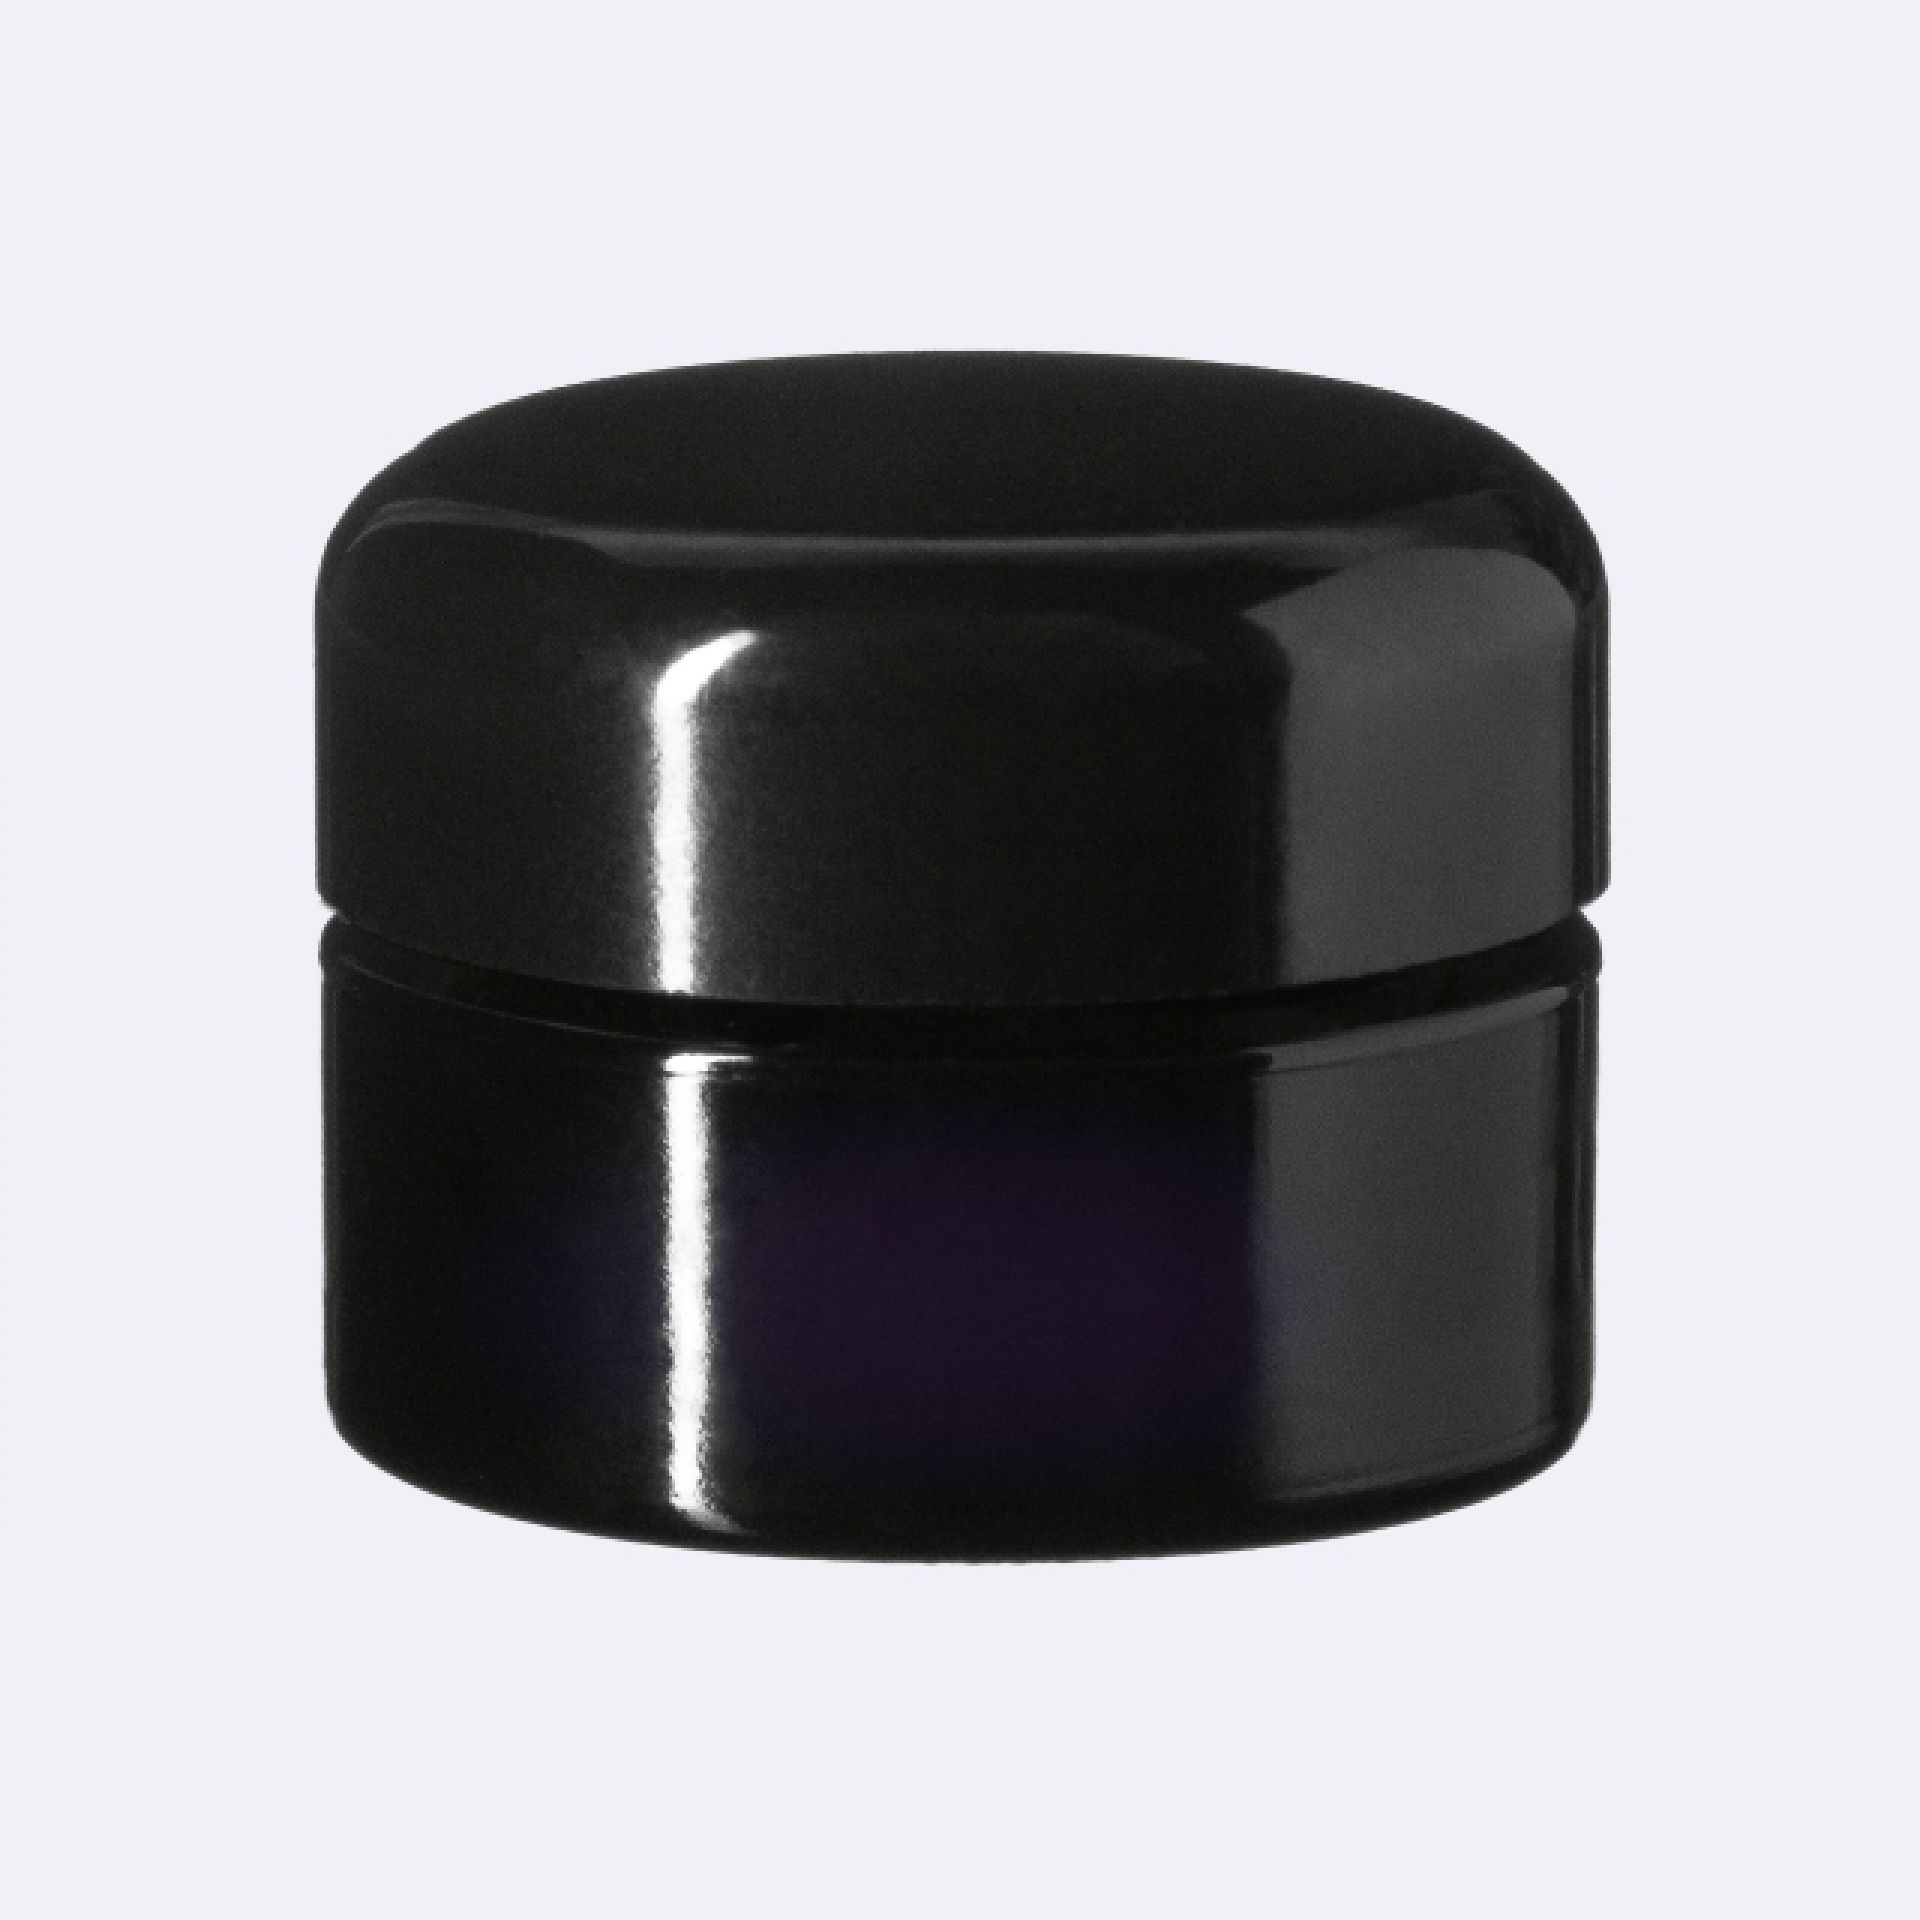 Lid Classic 34 special thread, UREA, black, glossy finish, violet Phan inlay (Ceres 10)